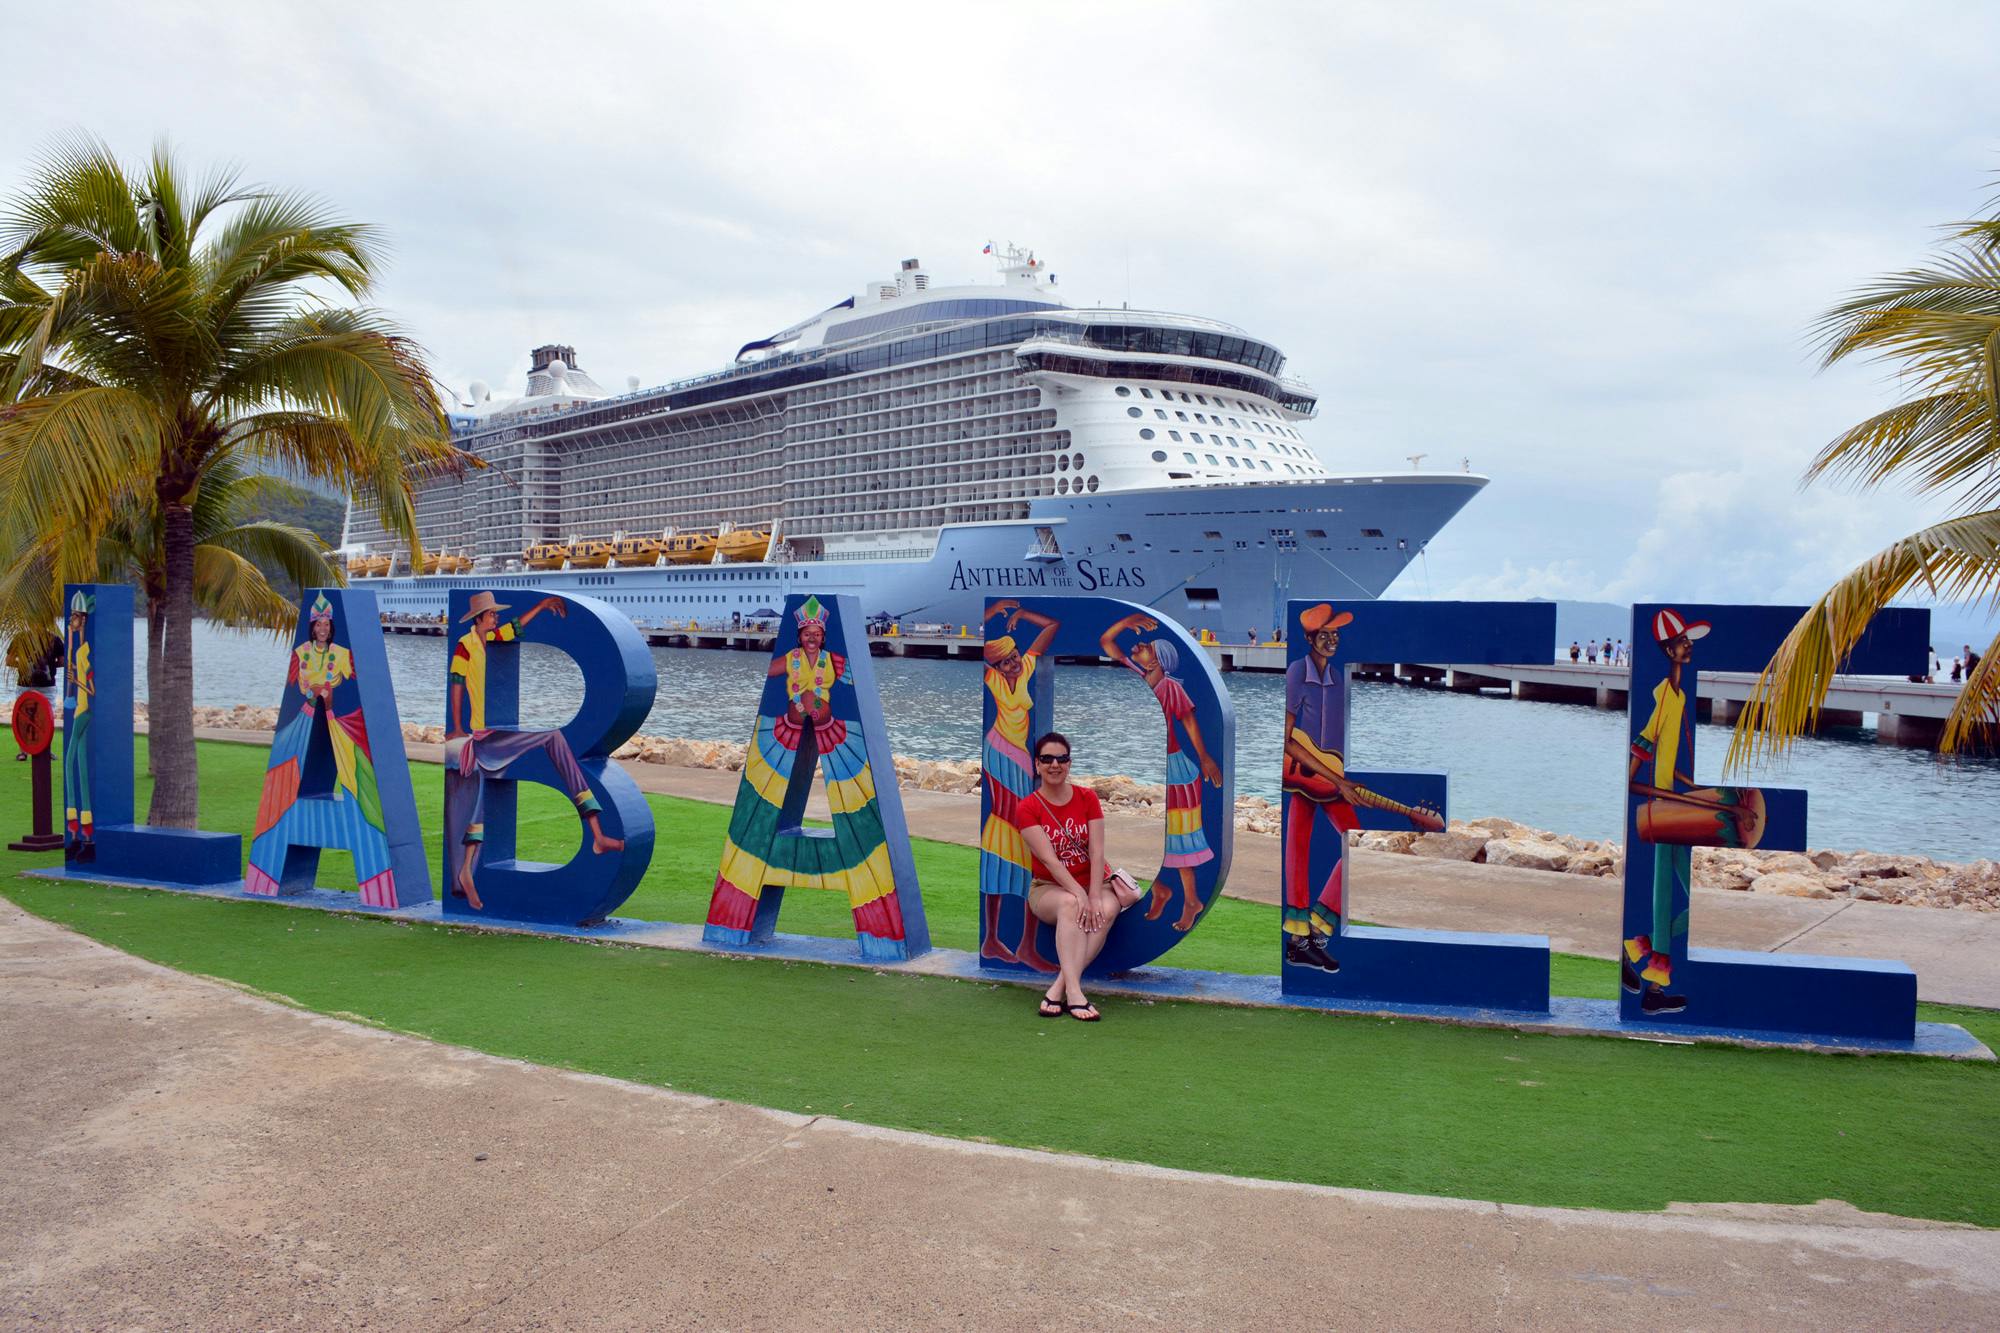 Anthem of the Seas Cruise Review by Tenor13 - May 23, 2019